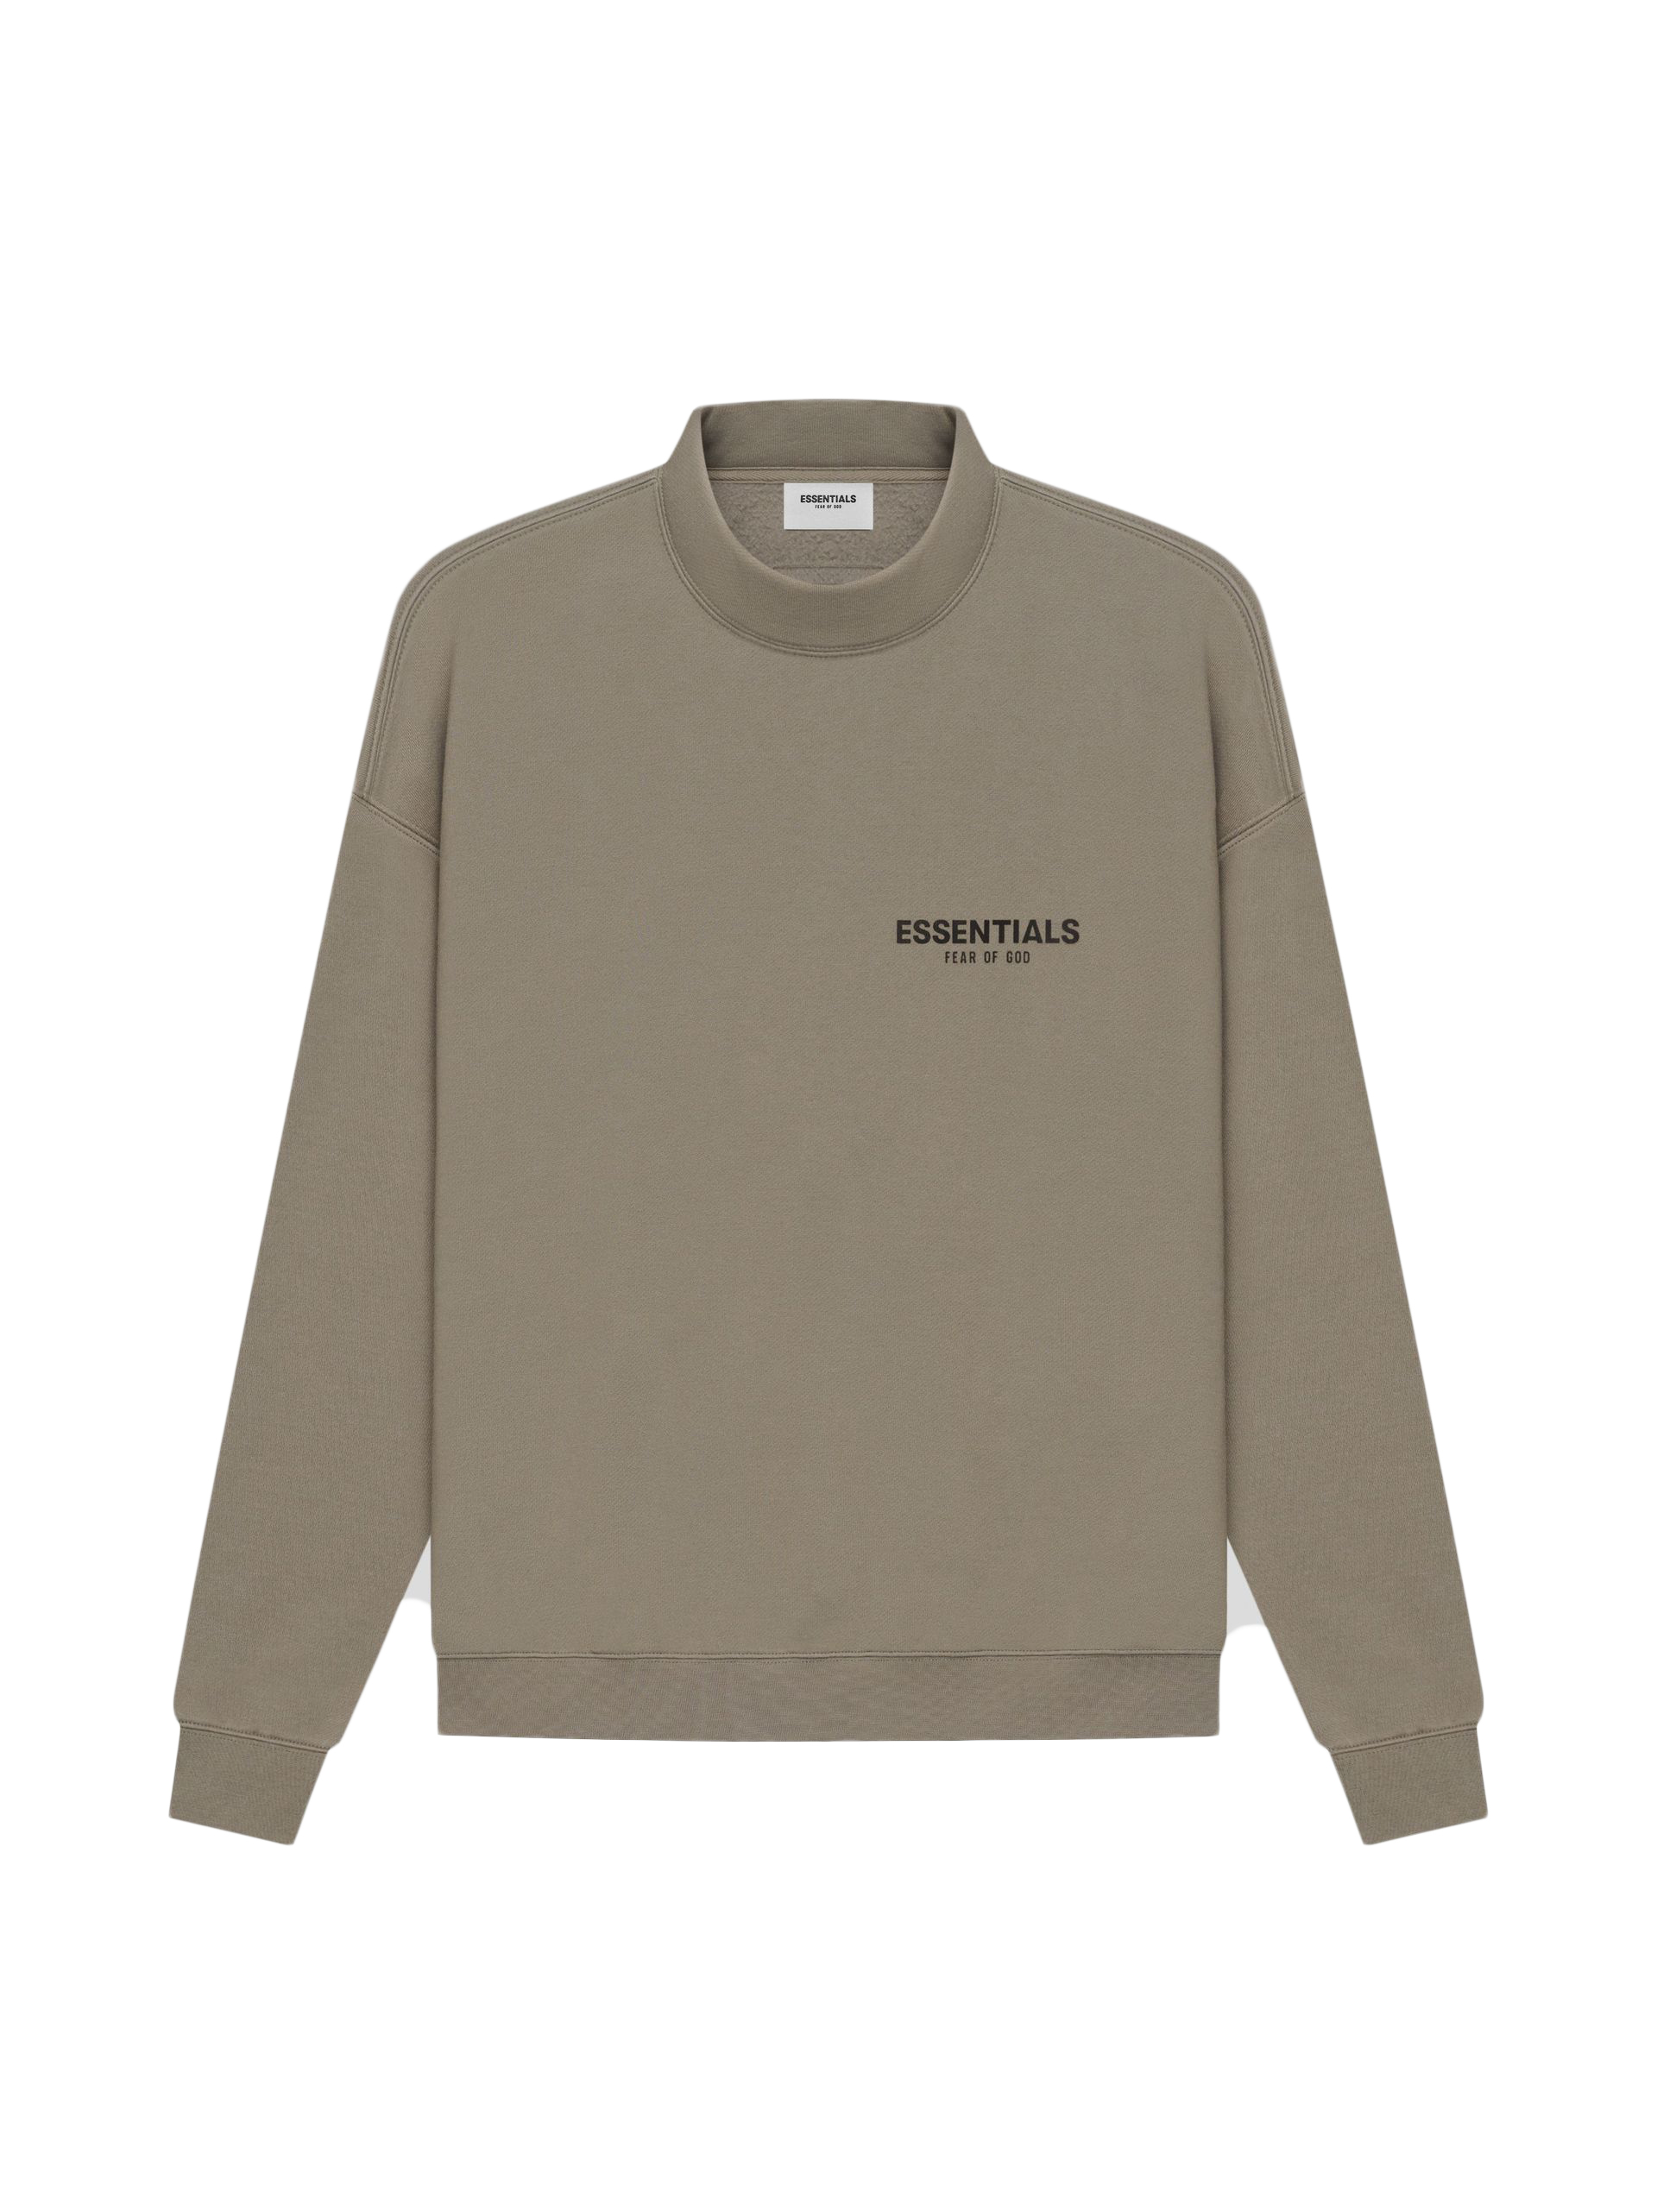 Fear of God Essentials Mock Neck Sweater Taupe - SS21 - US